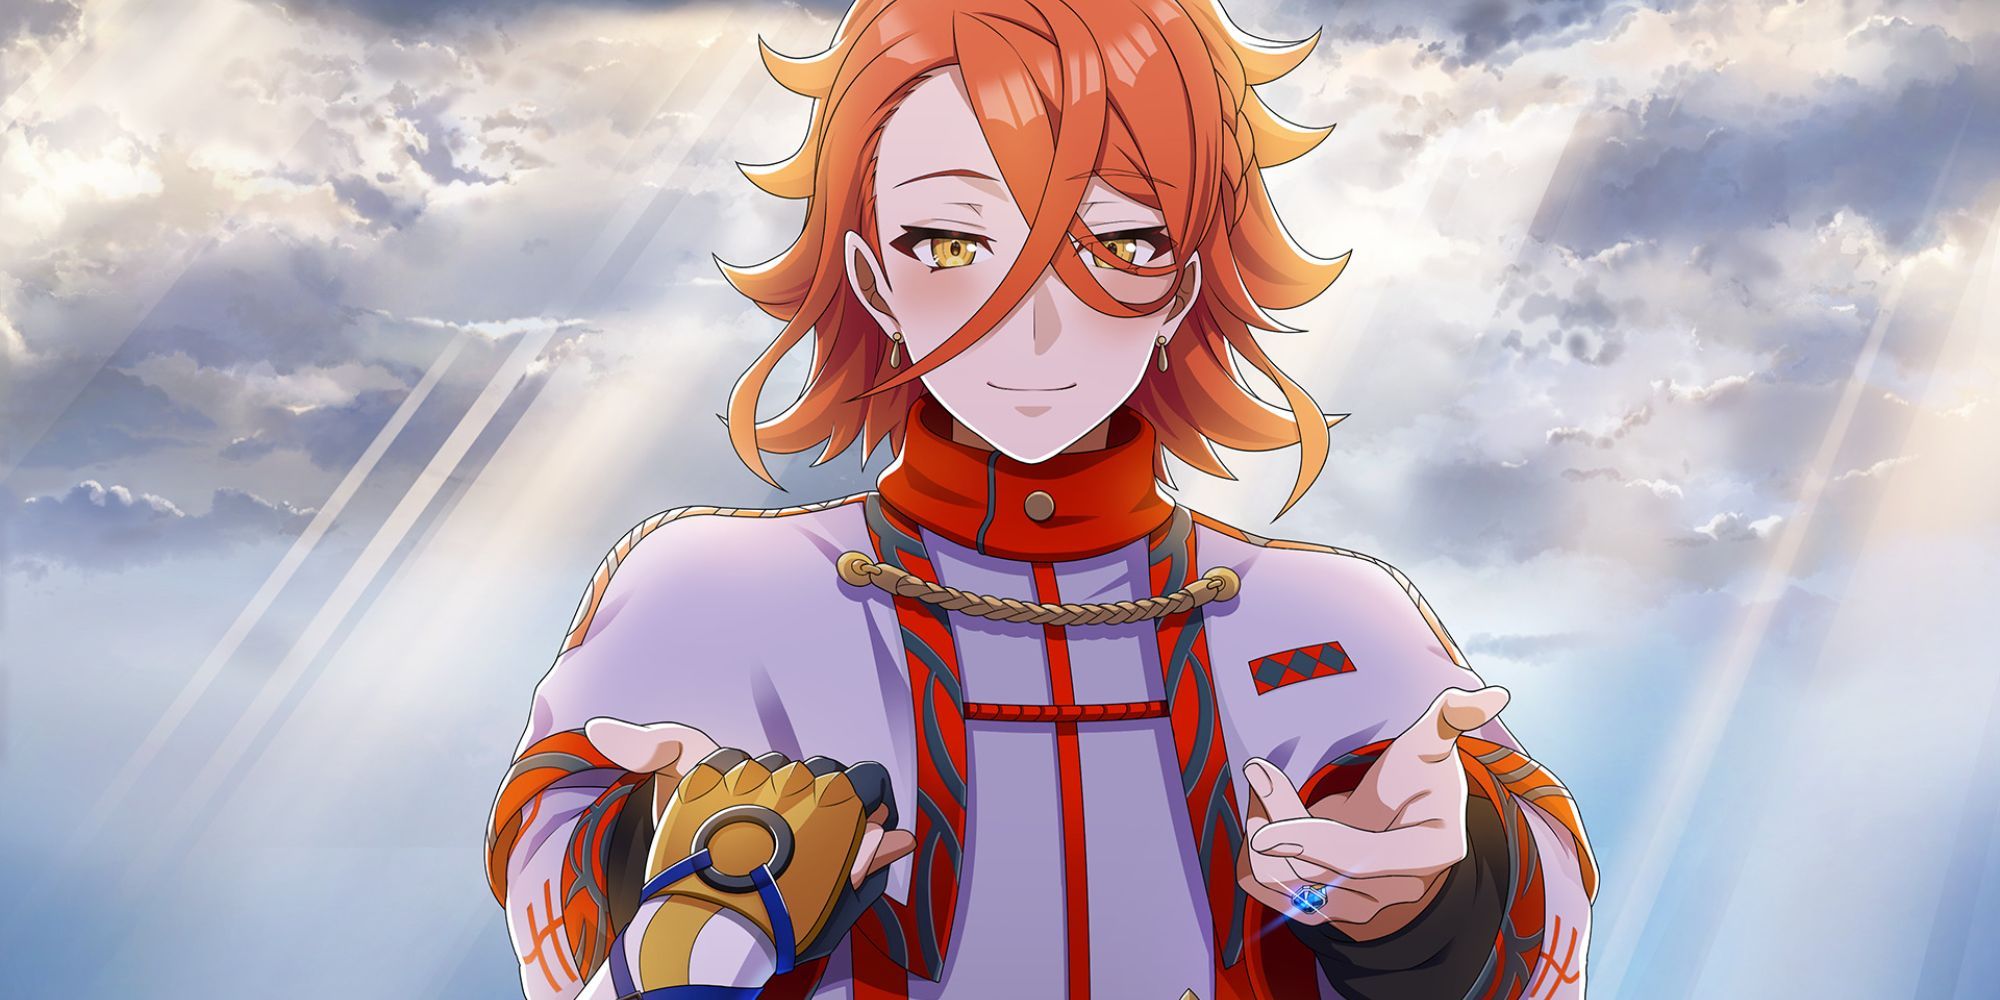 Pandreo from Fire Emblem: Engage receiving the Pact Ring from Alear